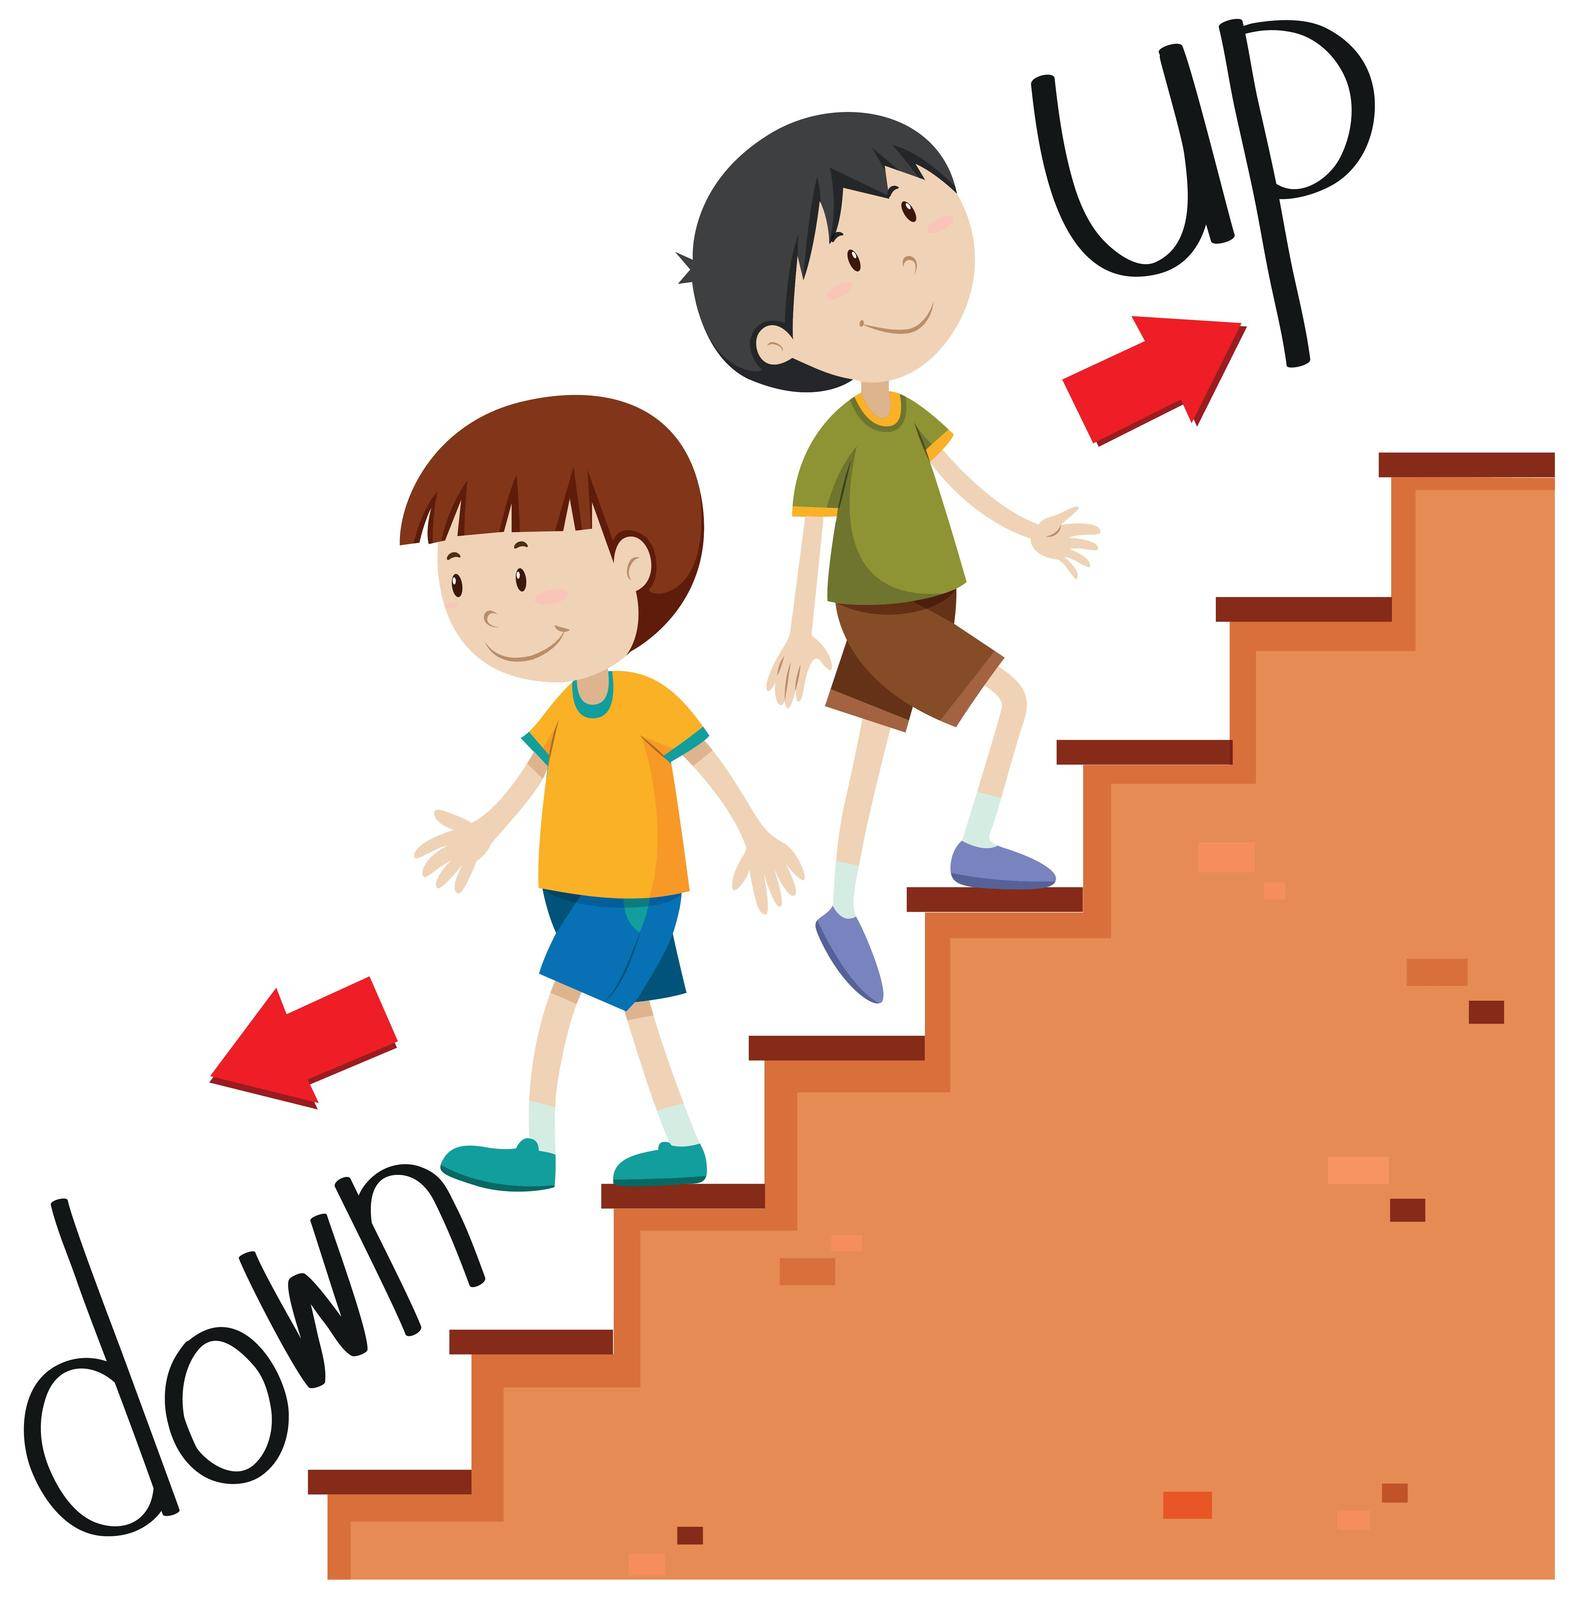 Boys walking up and down illustration